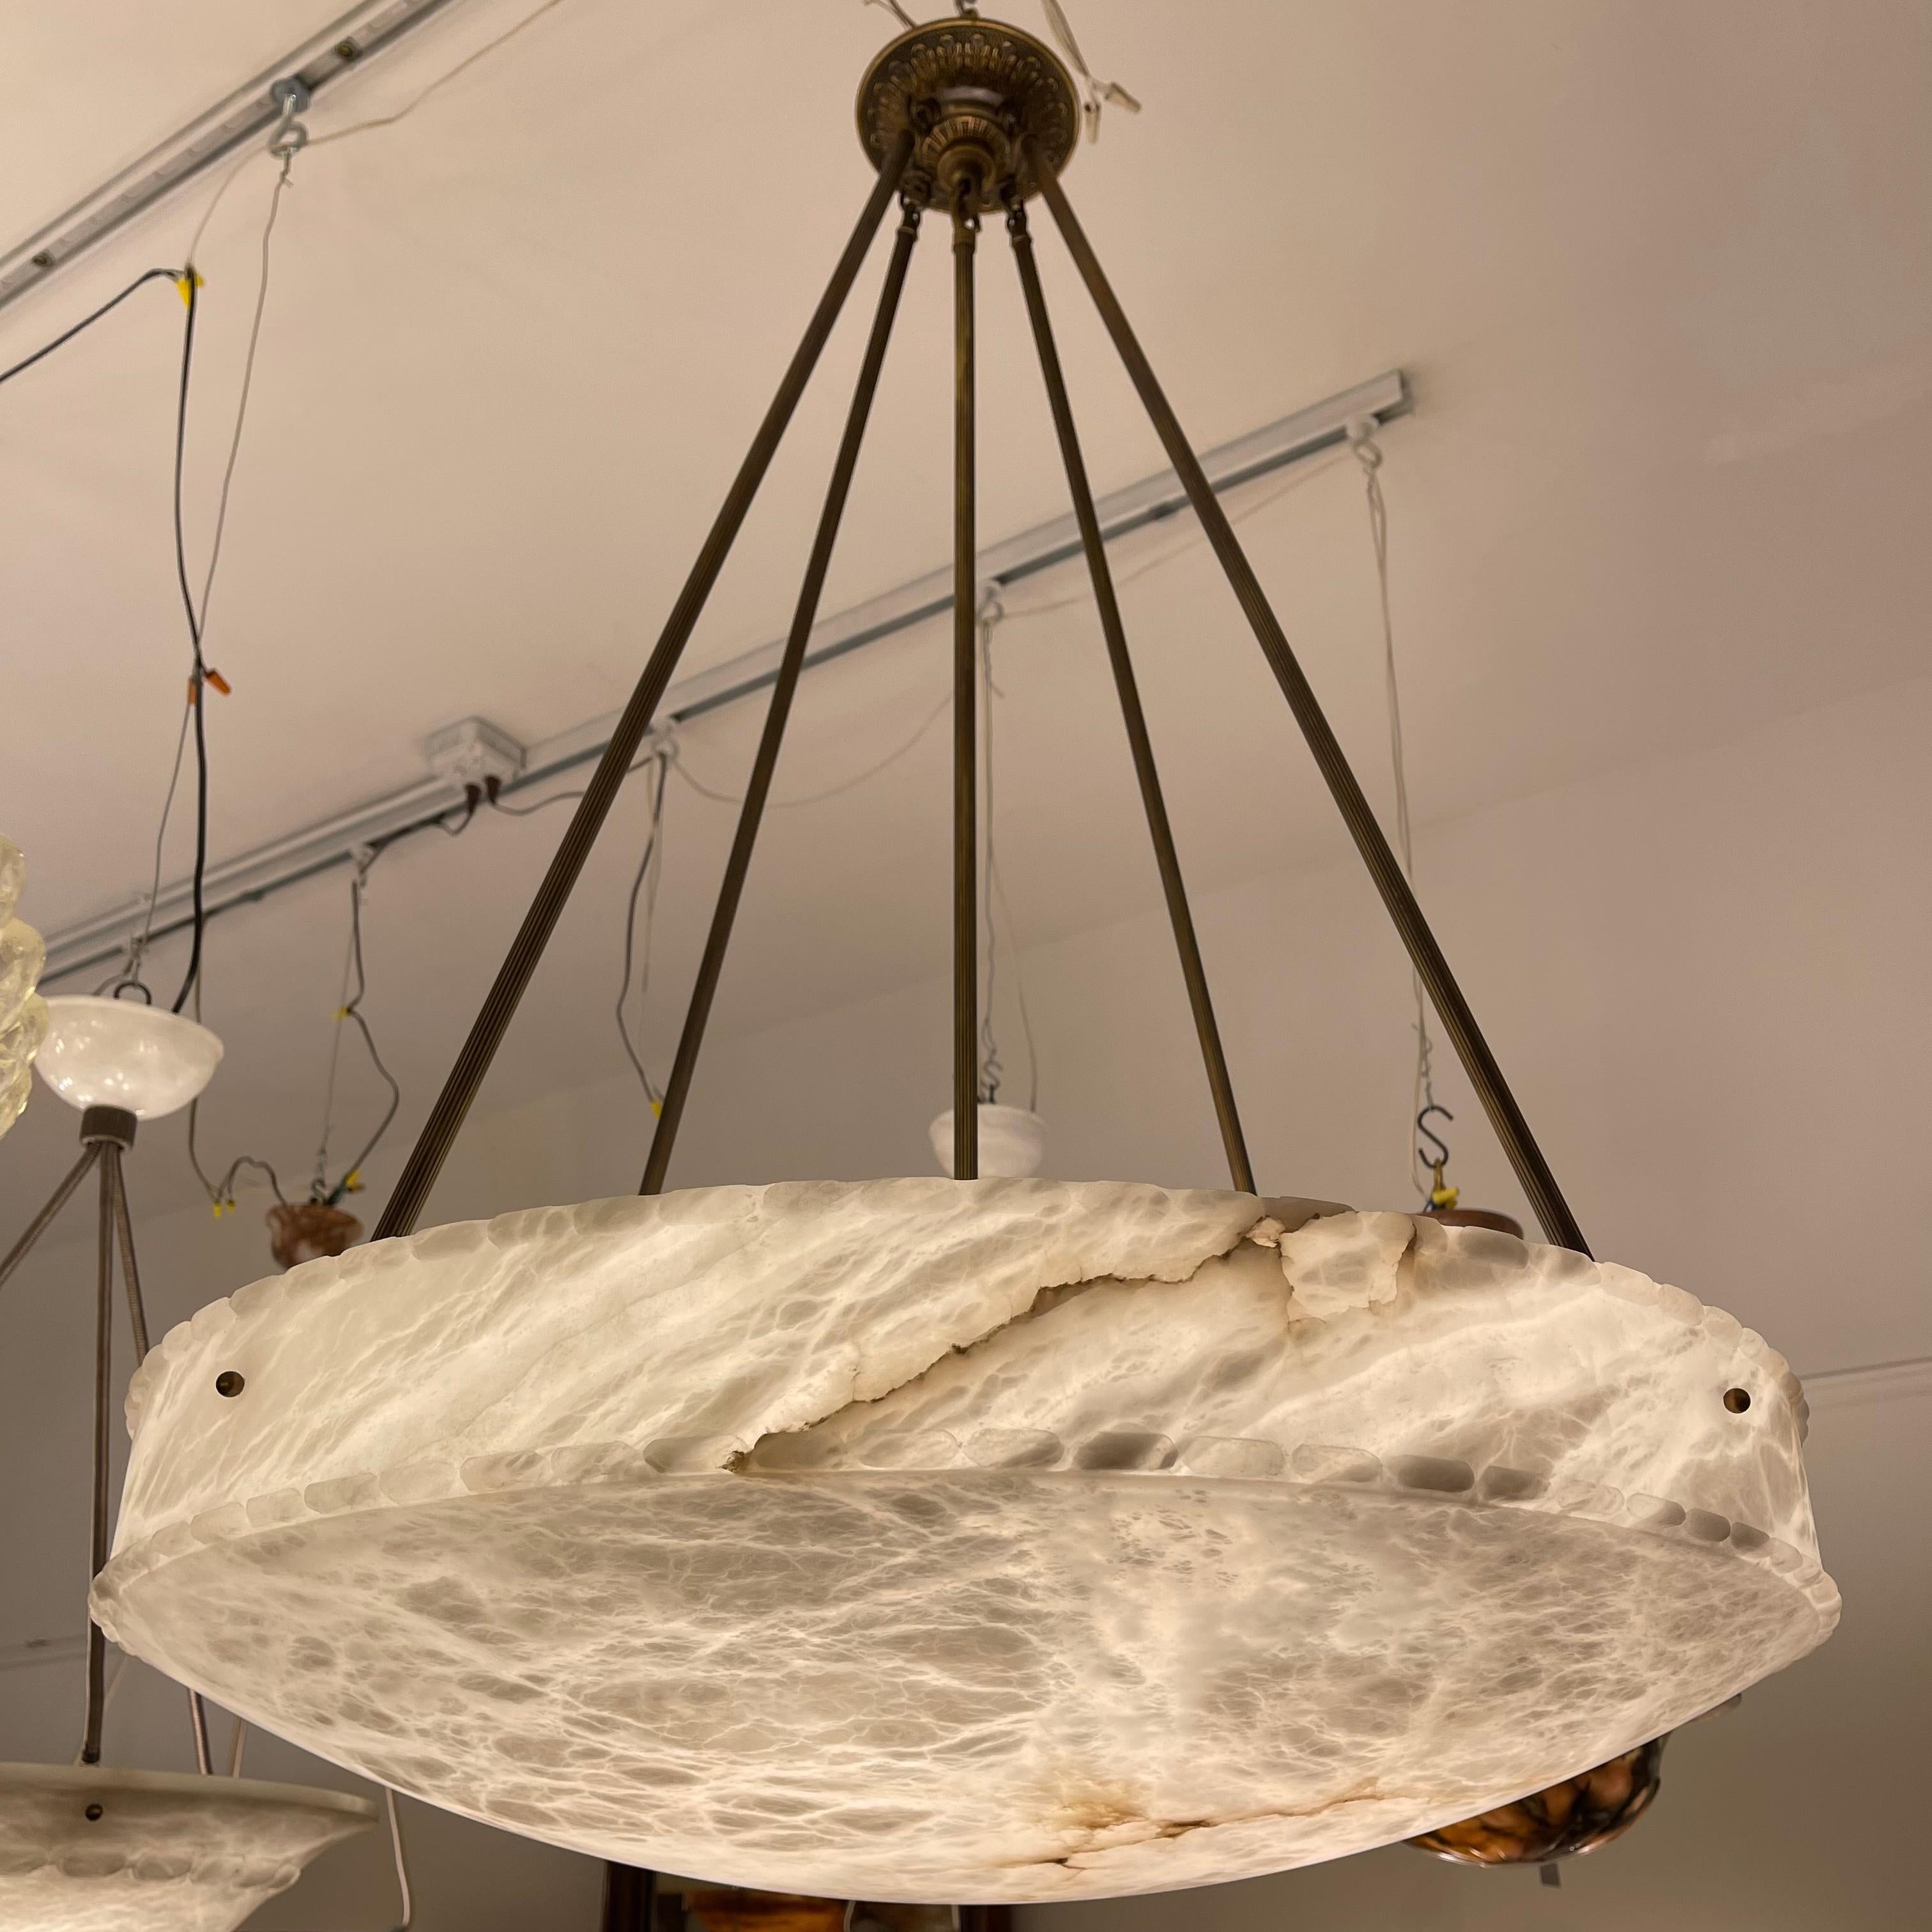 A large scale alabaster dish with gorgeous mineralization, mostly white with flecks of cloudy grey streaking across the face. Suspended on elegant brass rods from a matching brass canopy. Overall height is 45